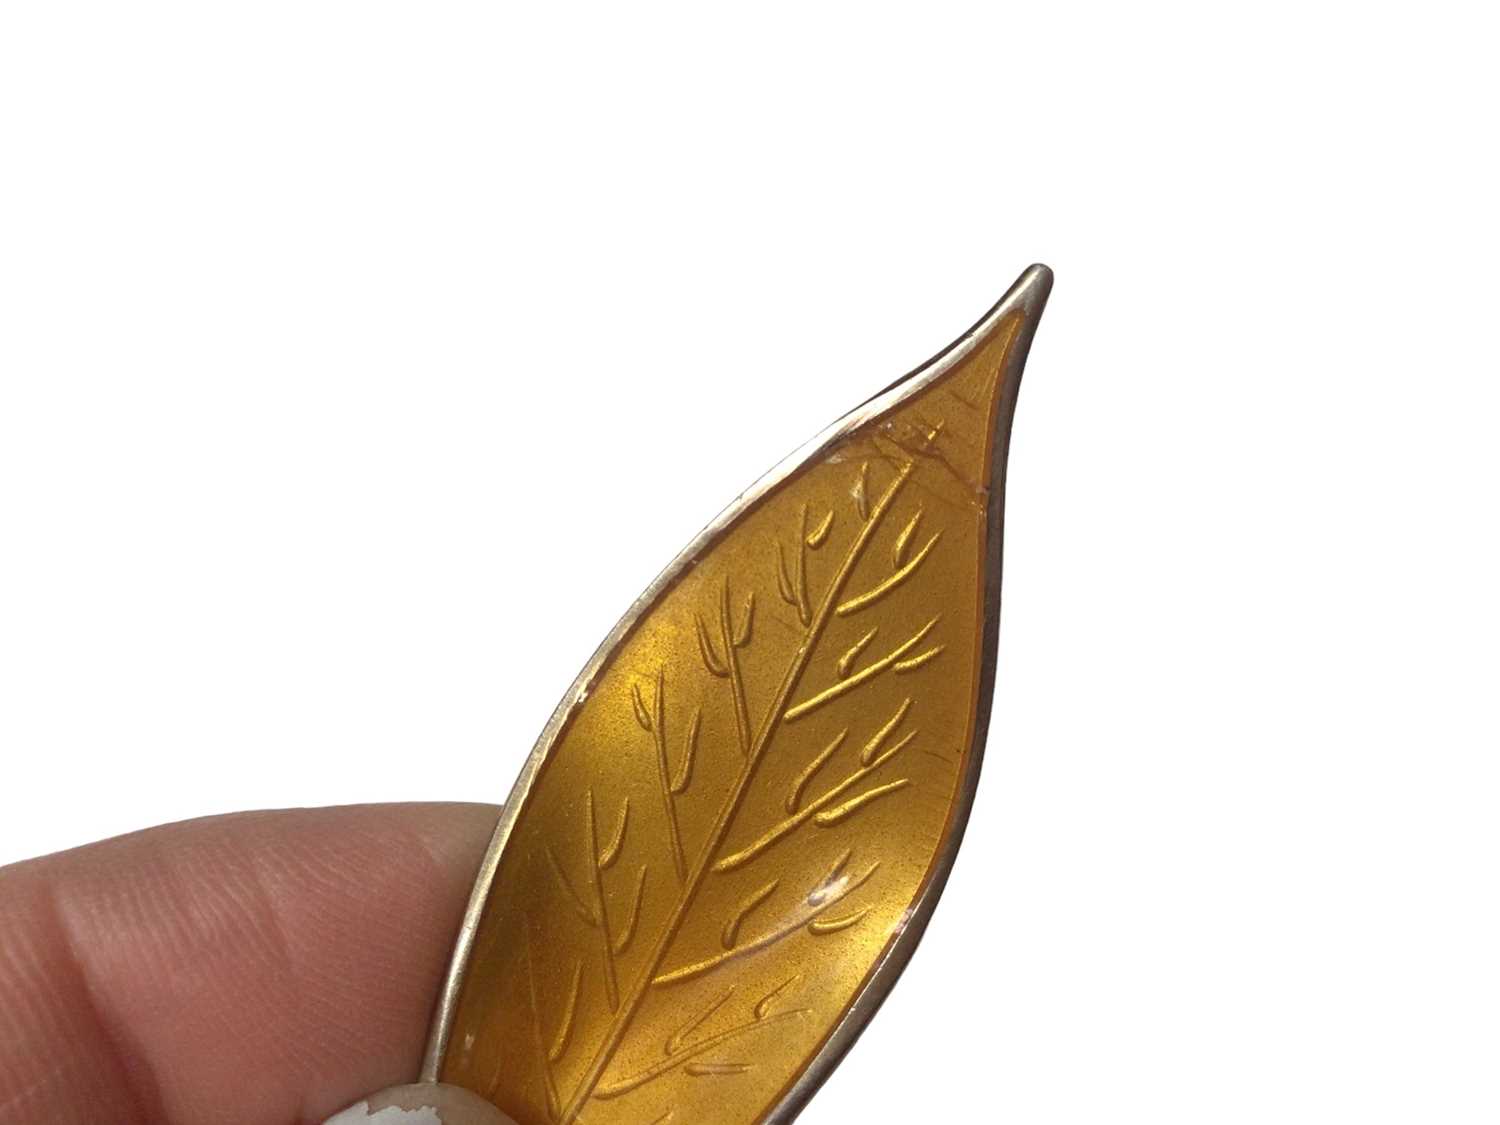 David Anderson Norwegian silver and enamel leaf brooch, other silver brooches, white metal Egyptian - Image 9 of 9